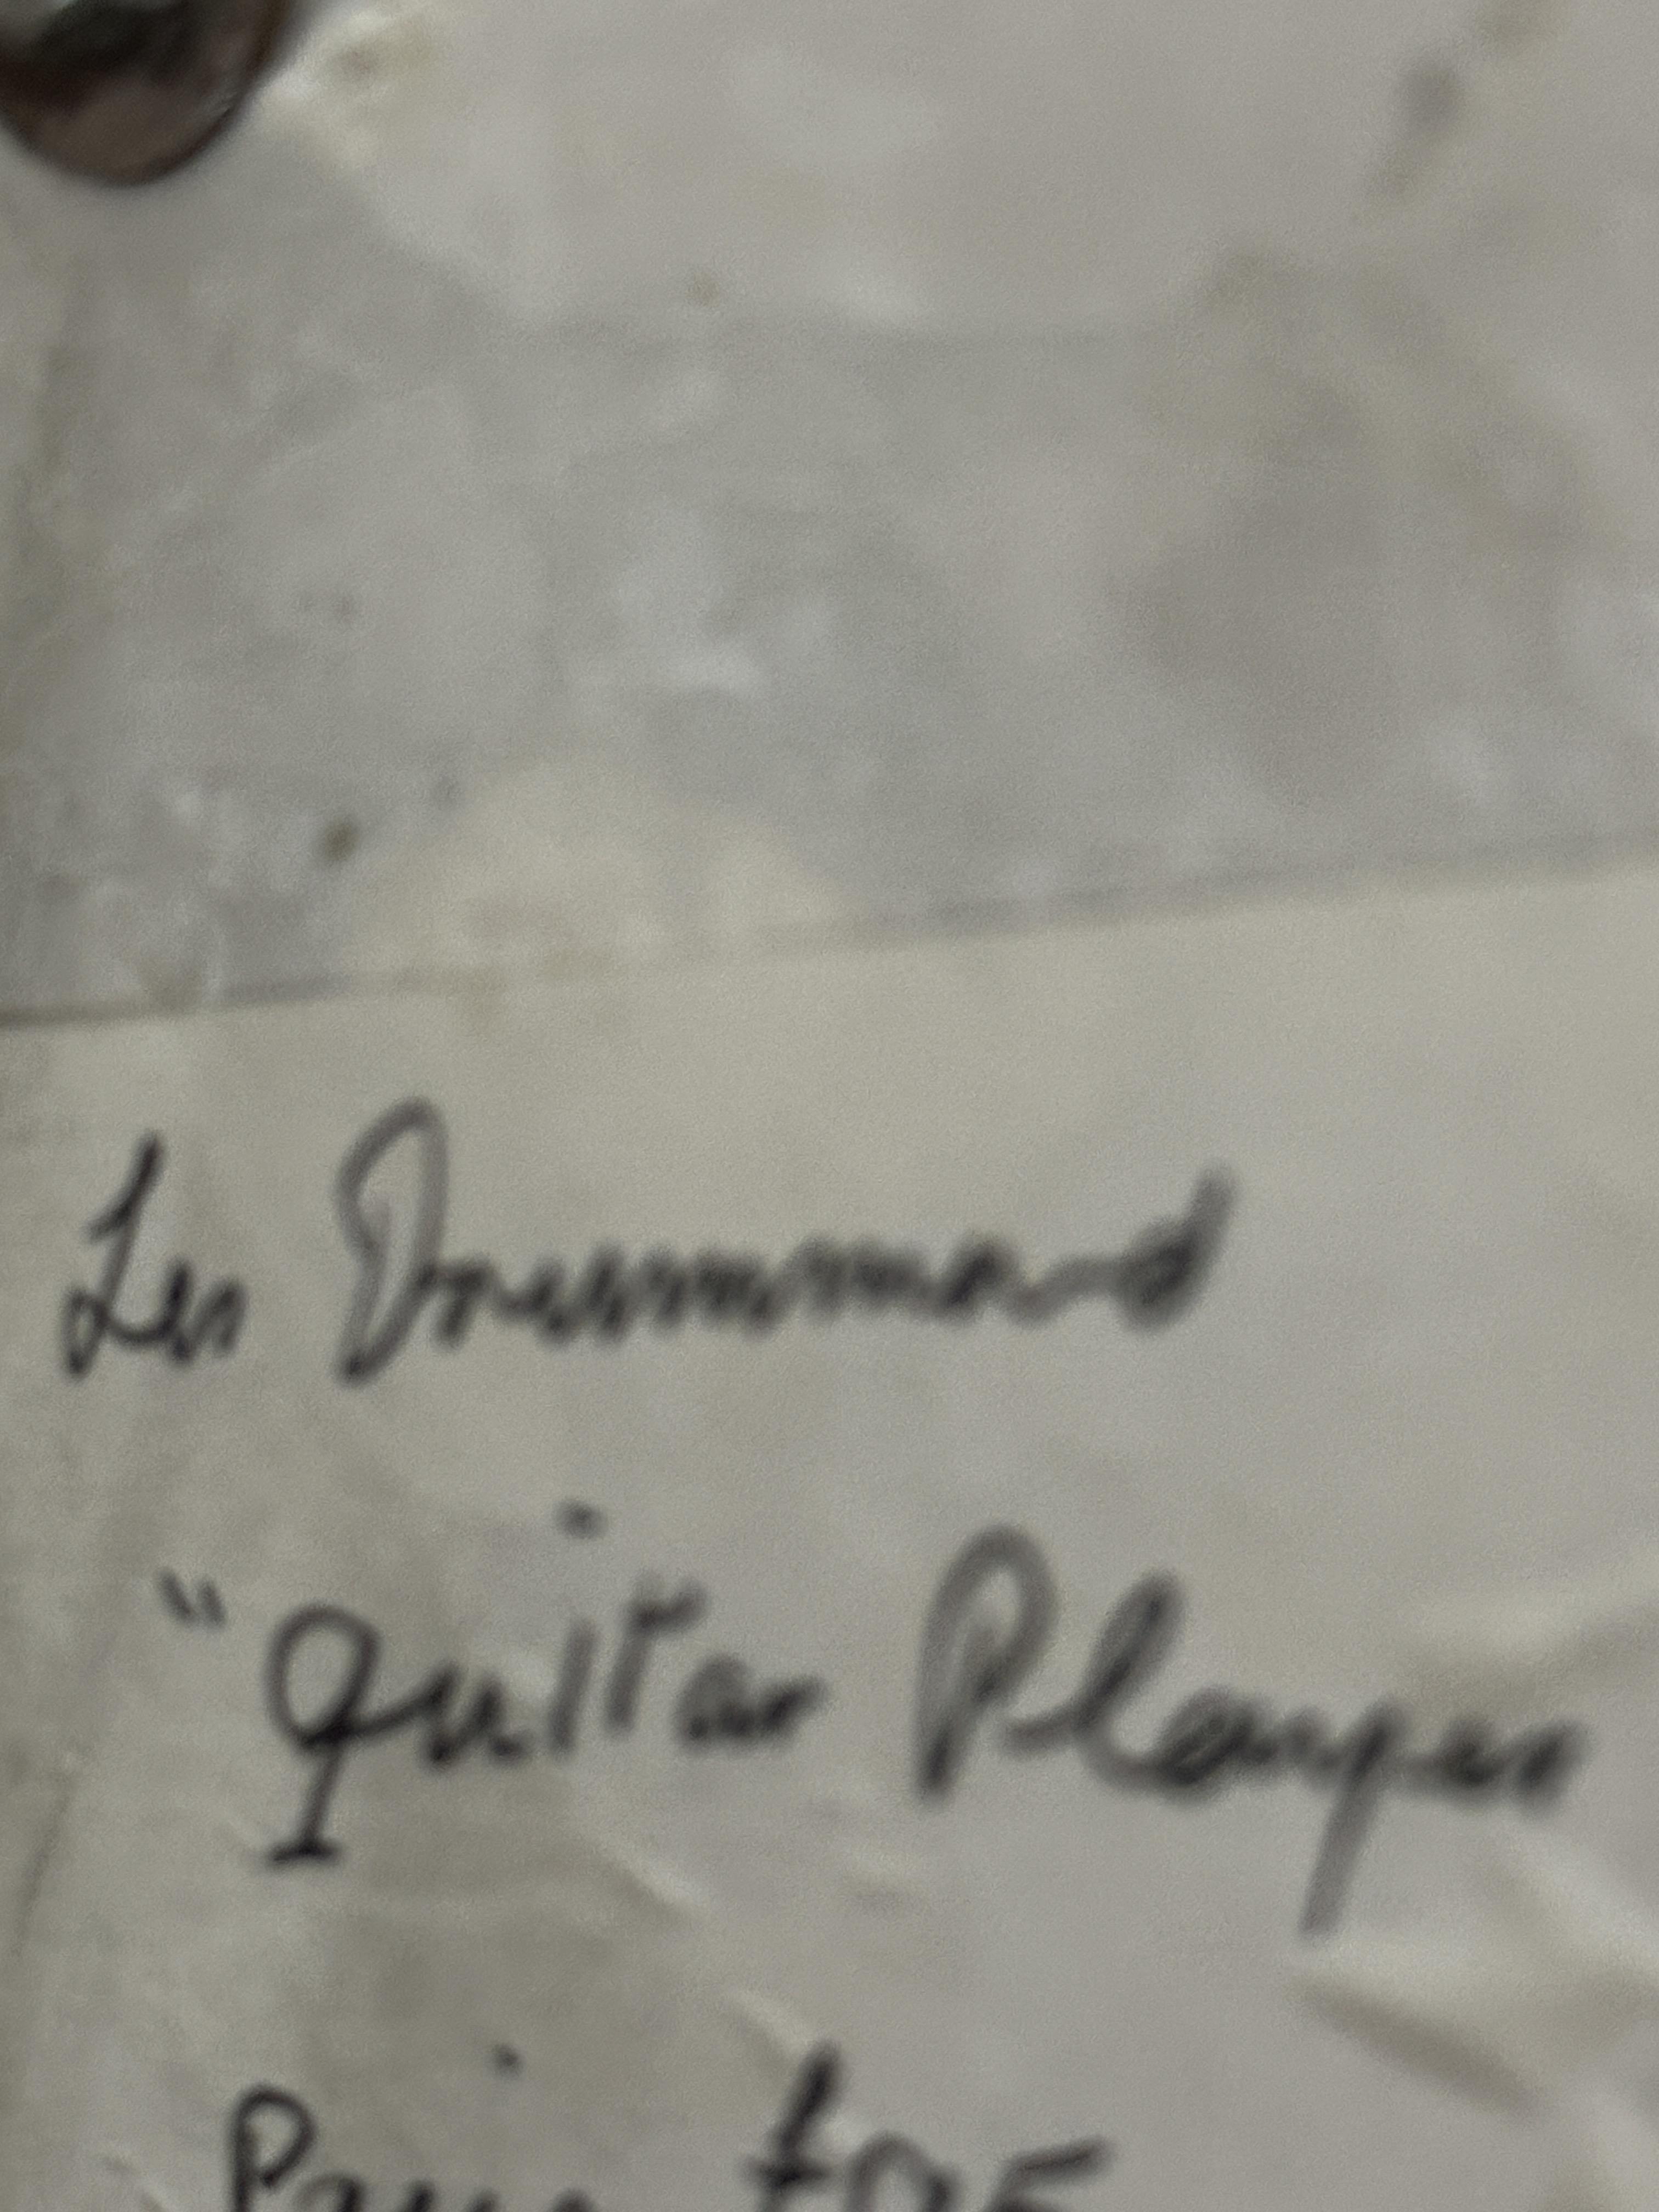 Les Drummond, Quiet Player, forged steelwork sculpture mounted on marble plinth, paper label verso H - Image 3 of 3